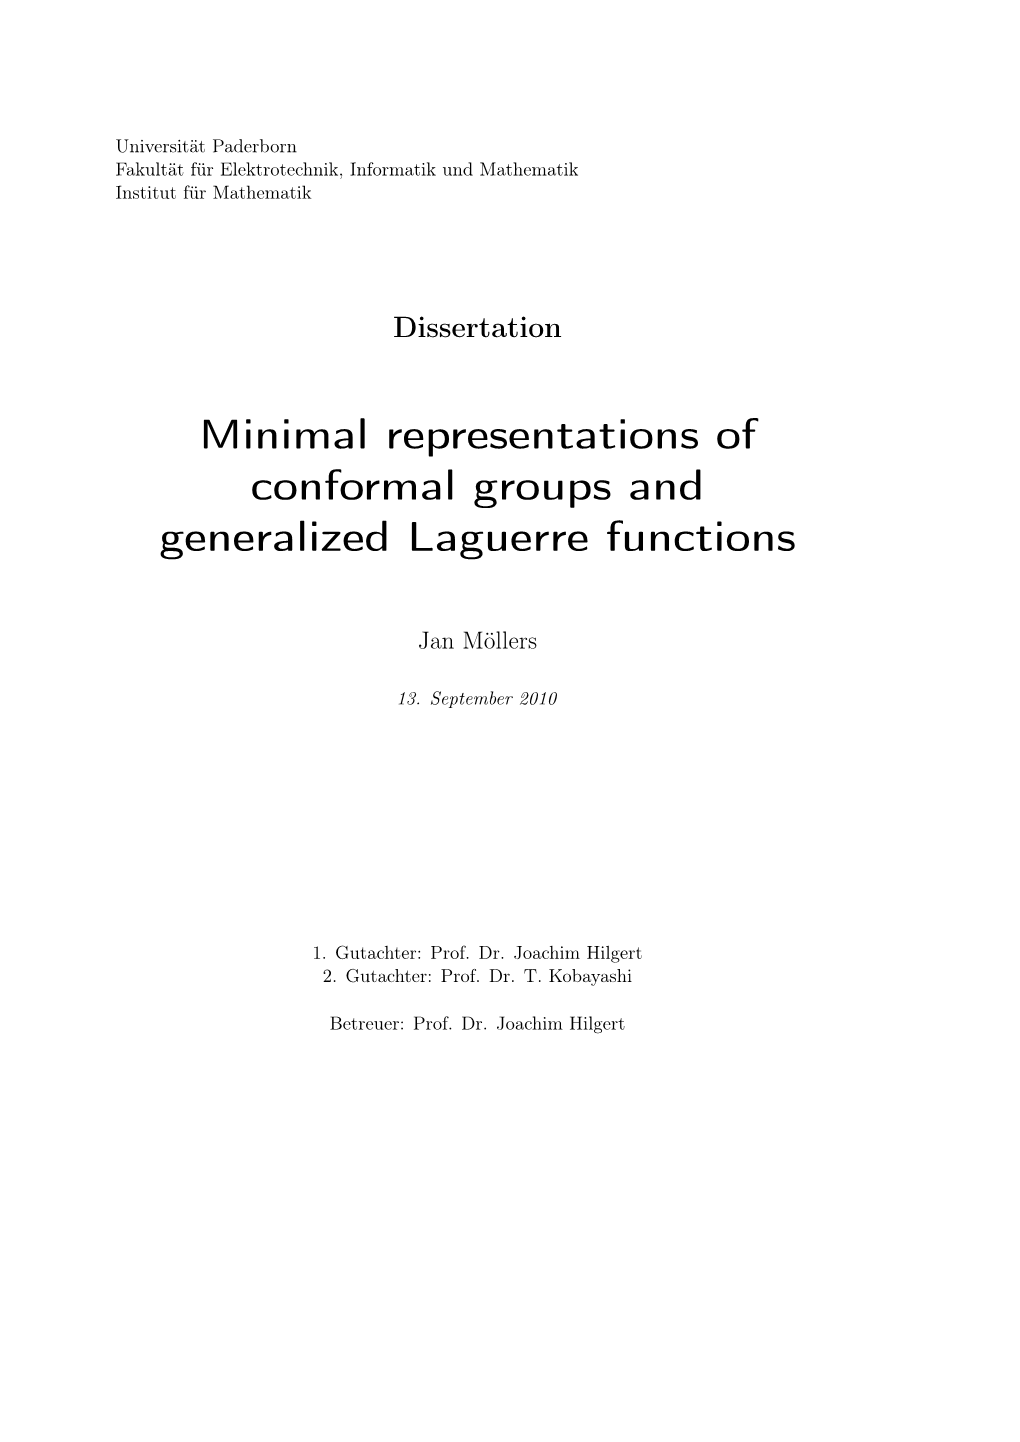 Minimal Representations of Conformal Groups and Generalized Laguerre Functions